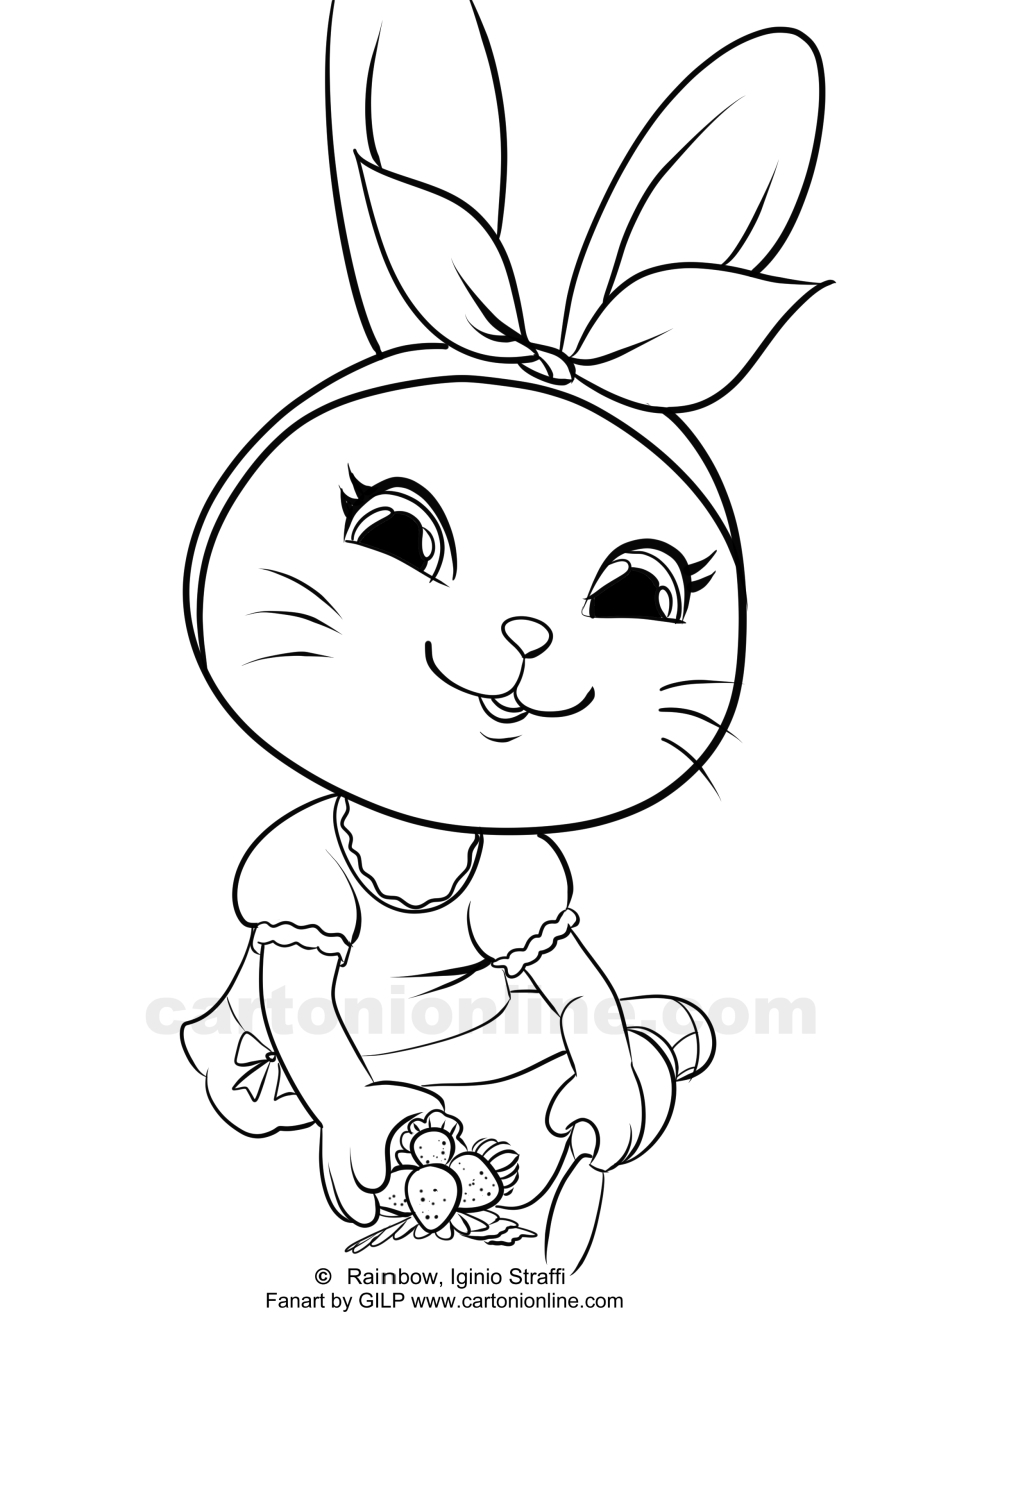 Summer by Summer & Todd coloring page to print and color